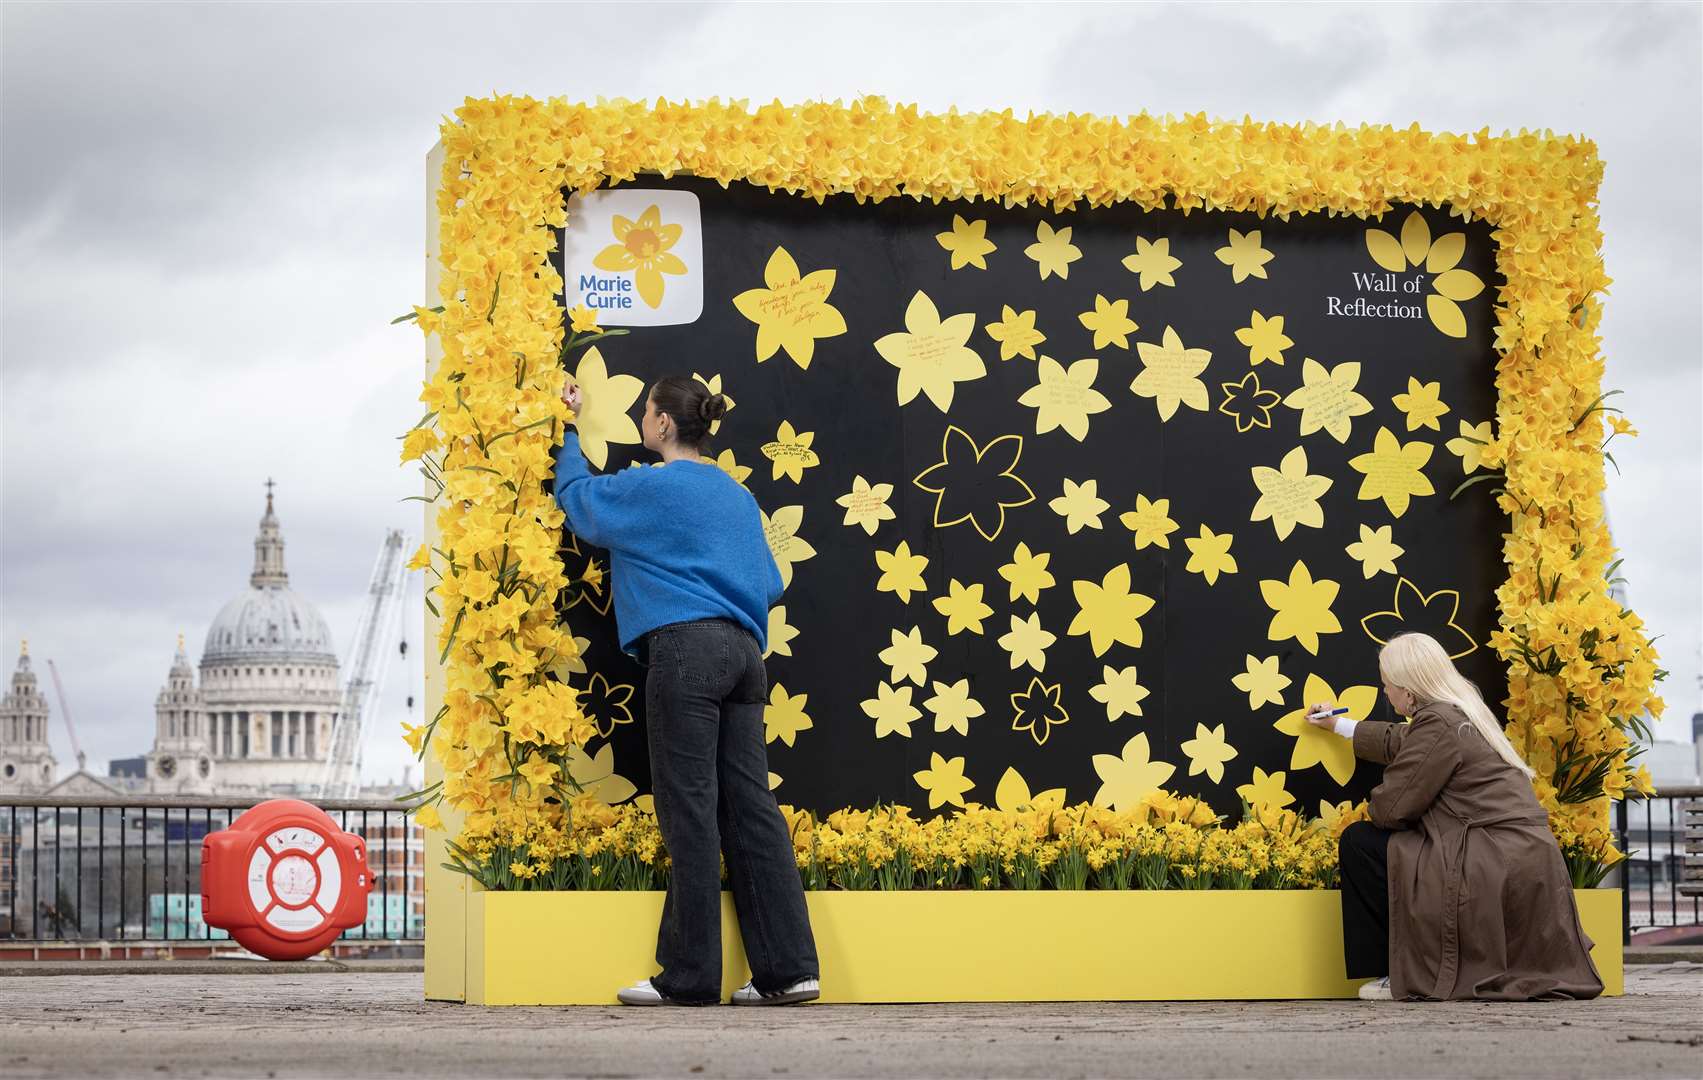 The Wall of Reflection, set up by charity Marie Curie, on London’s South Bank (Matt Alexander/PA)